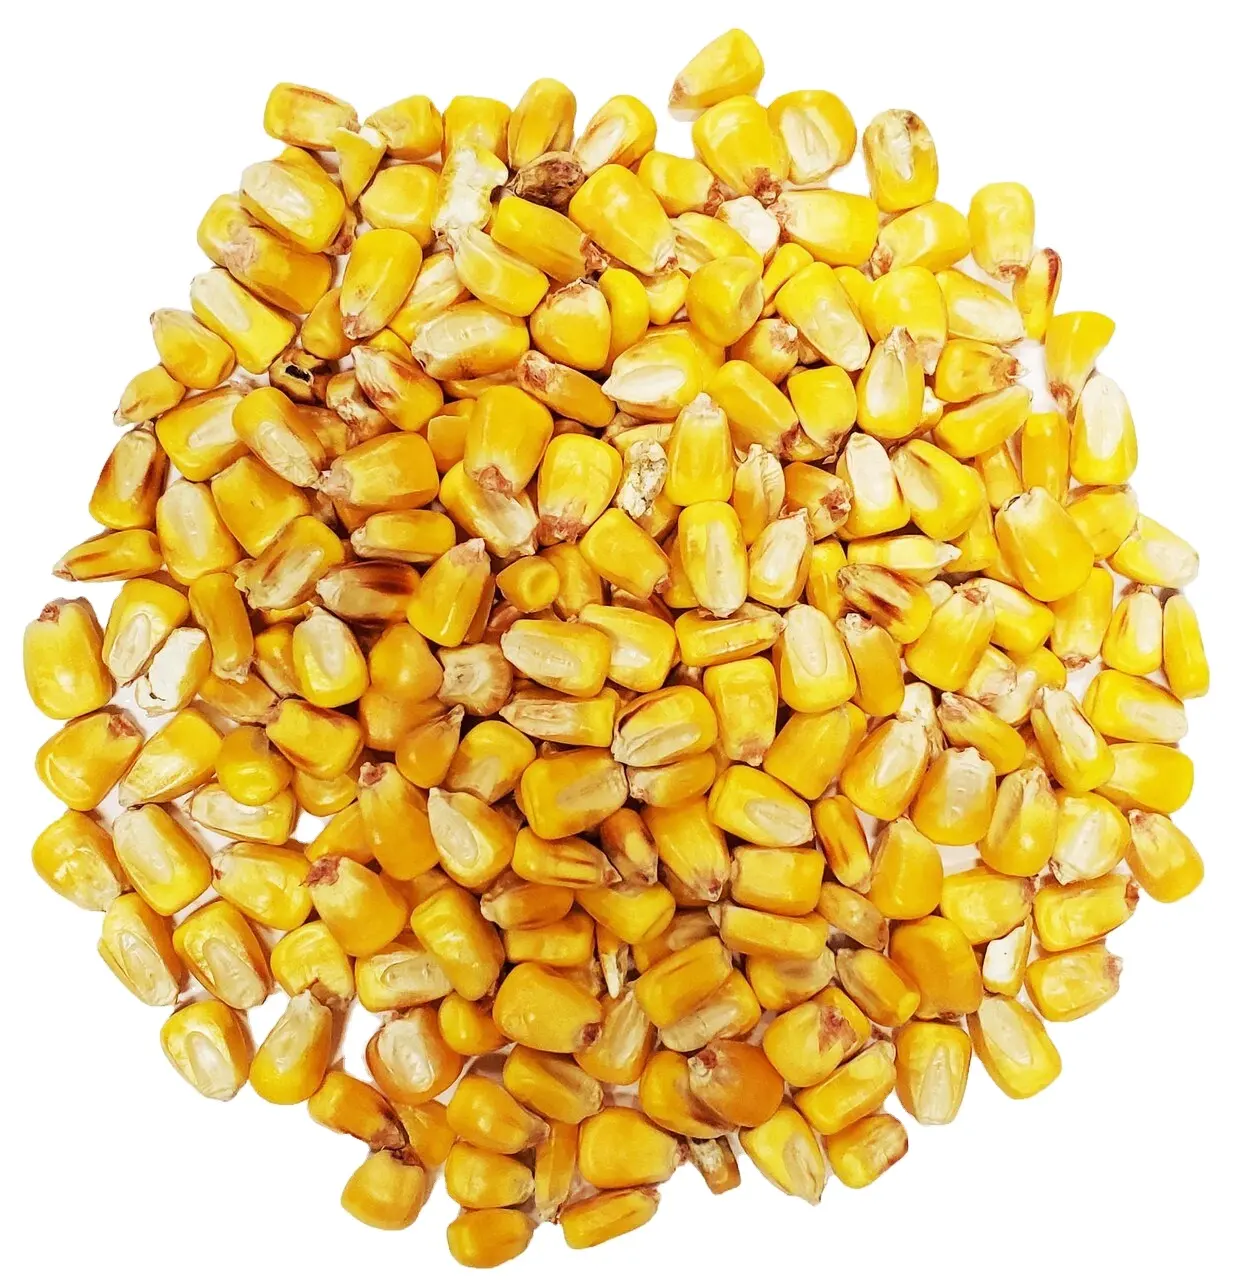 Yellow Corn / Maize For Animal Feed Dry Style Poultry Feed First Grade Quality For Bulk Sales Lowest Price 50kg Bag